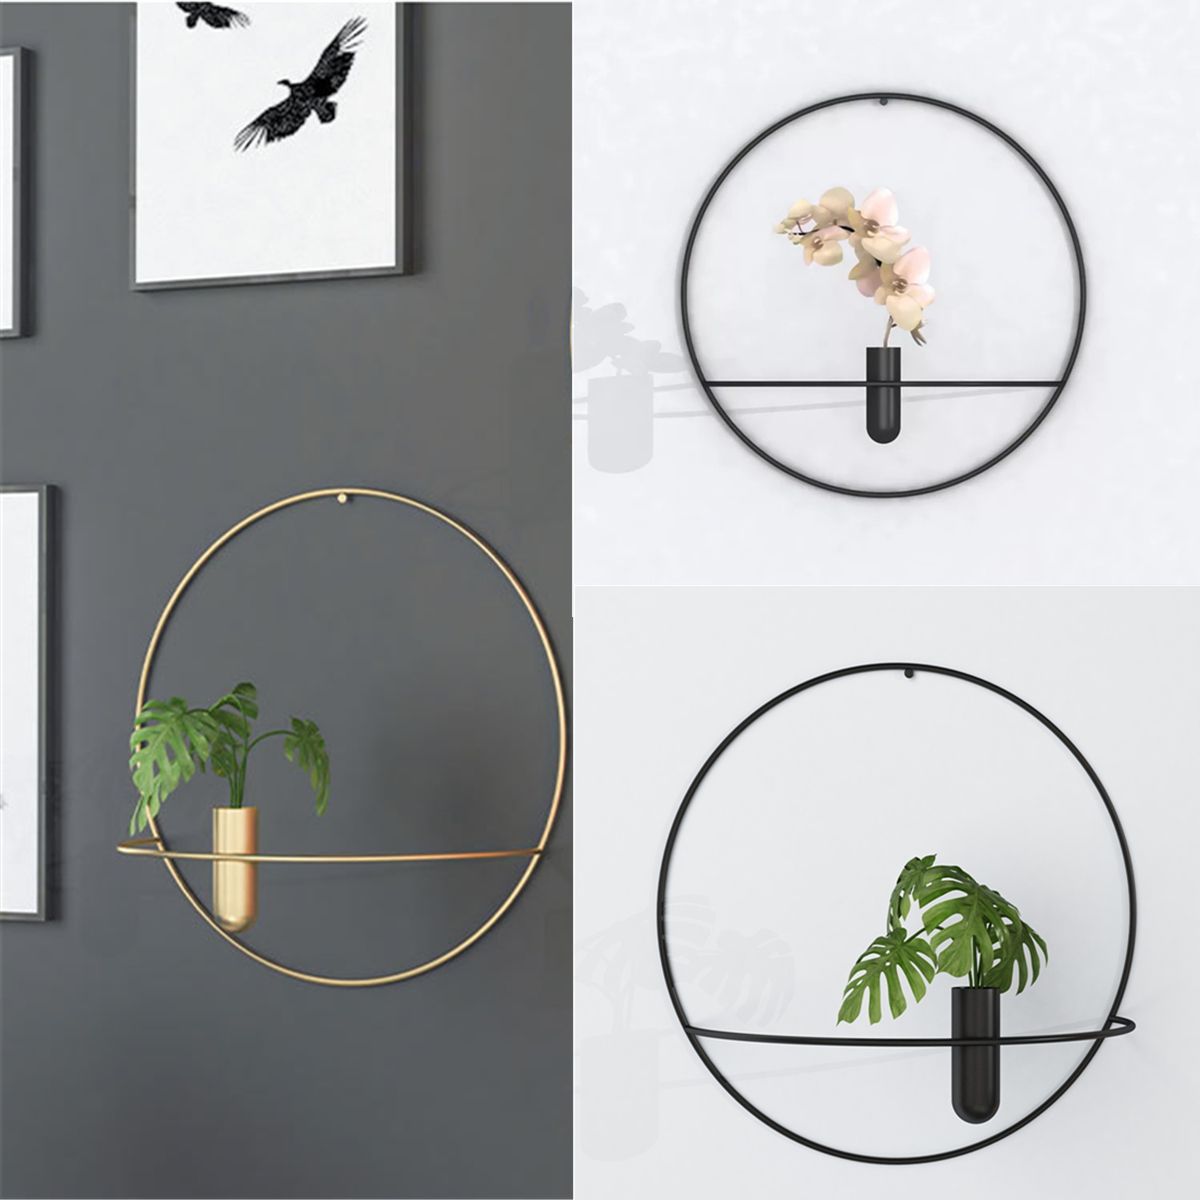 3D-Metal-Candlestick-Wall-Hanging-Geometric-Round-Candle-Holder-Home-Decor-1436136